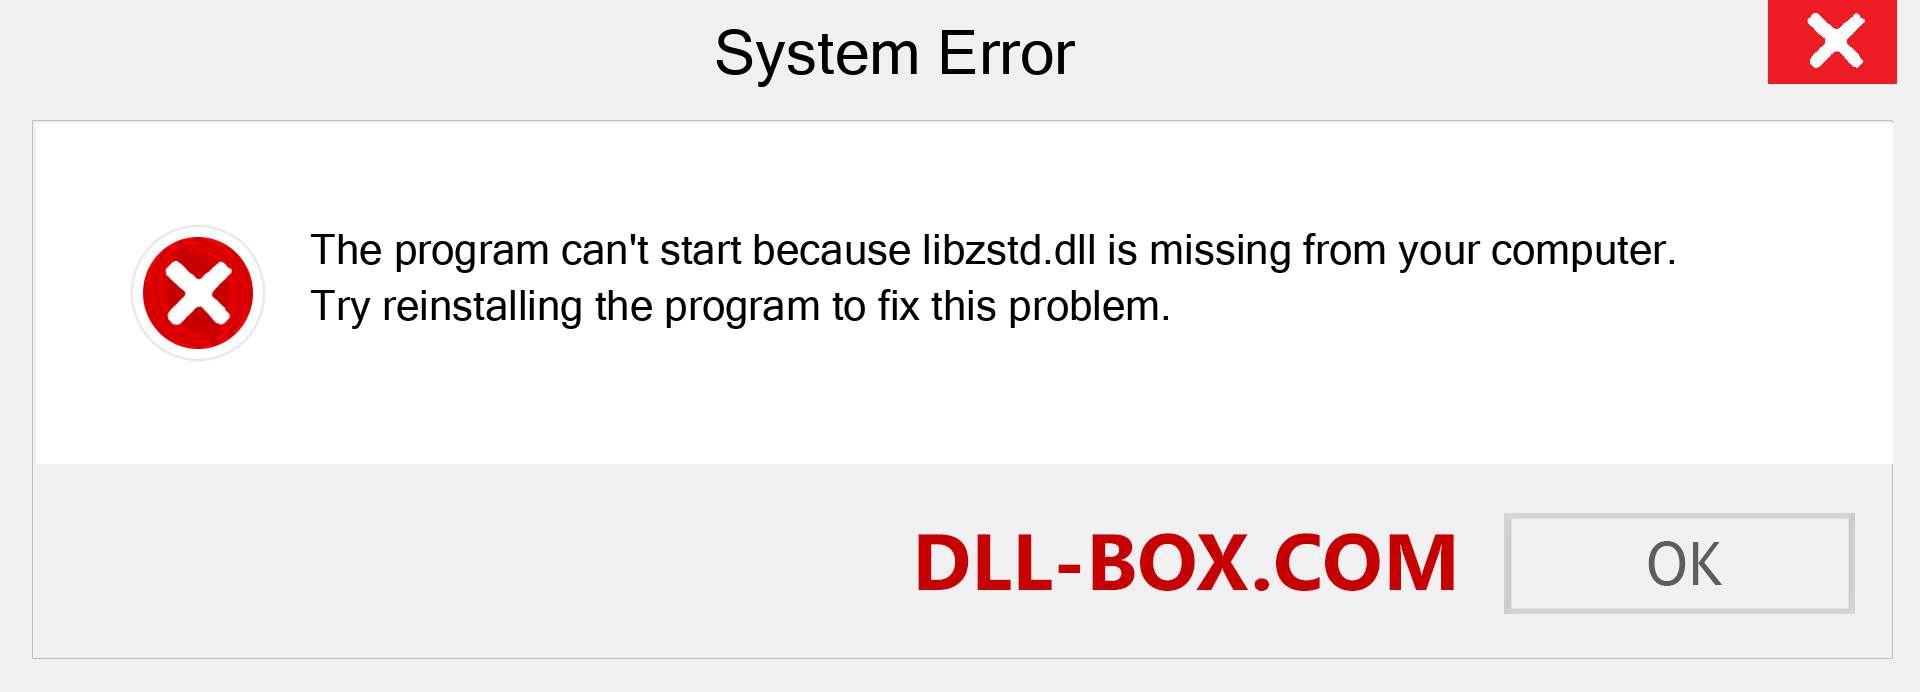  libzstd.dll file is missing?. Download for Windows 7, 8, 10 - Fix  libzstd dll Missing Error on Windows, photos, images